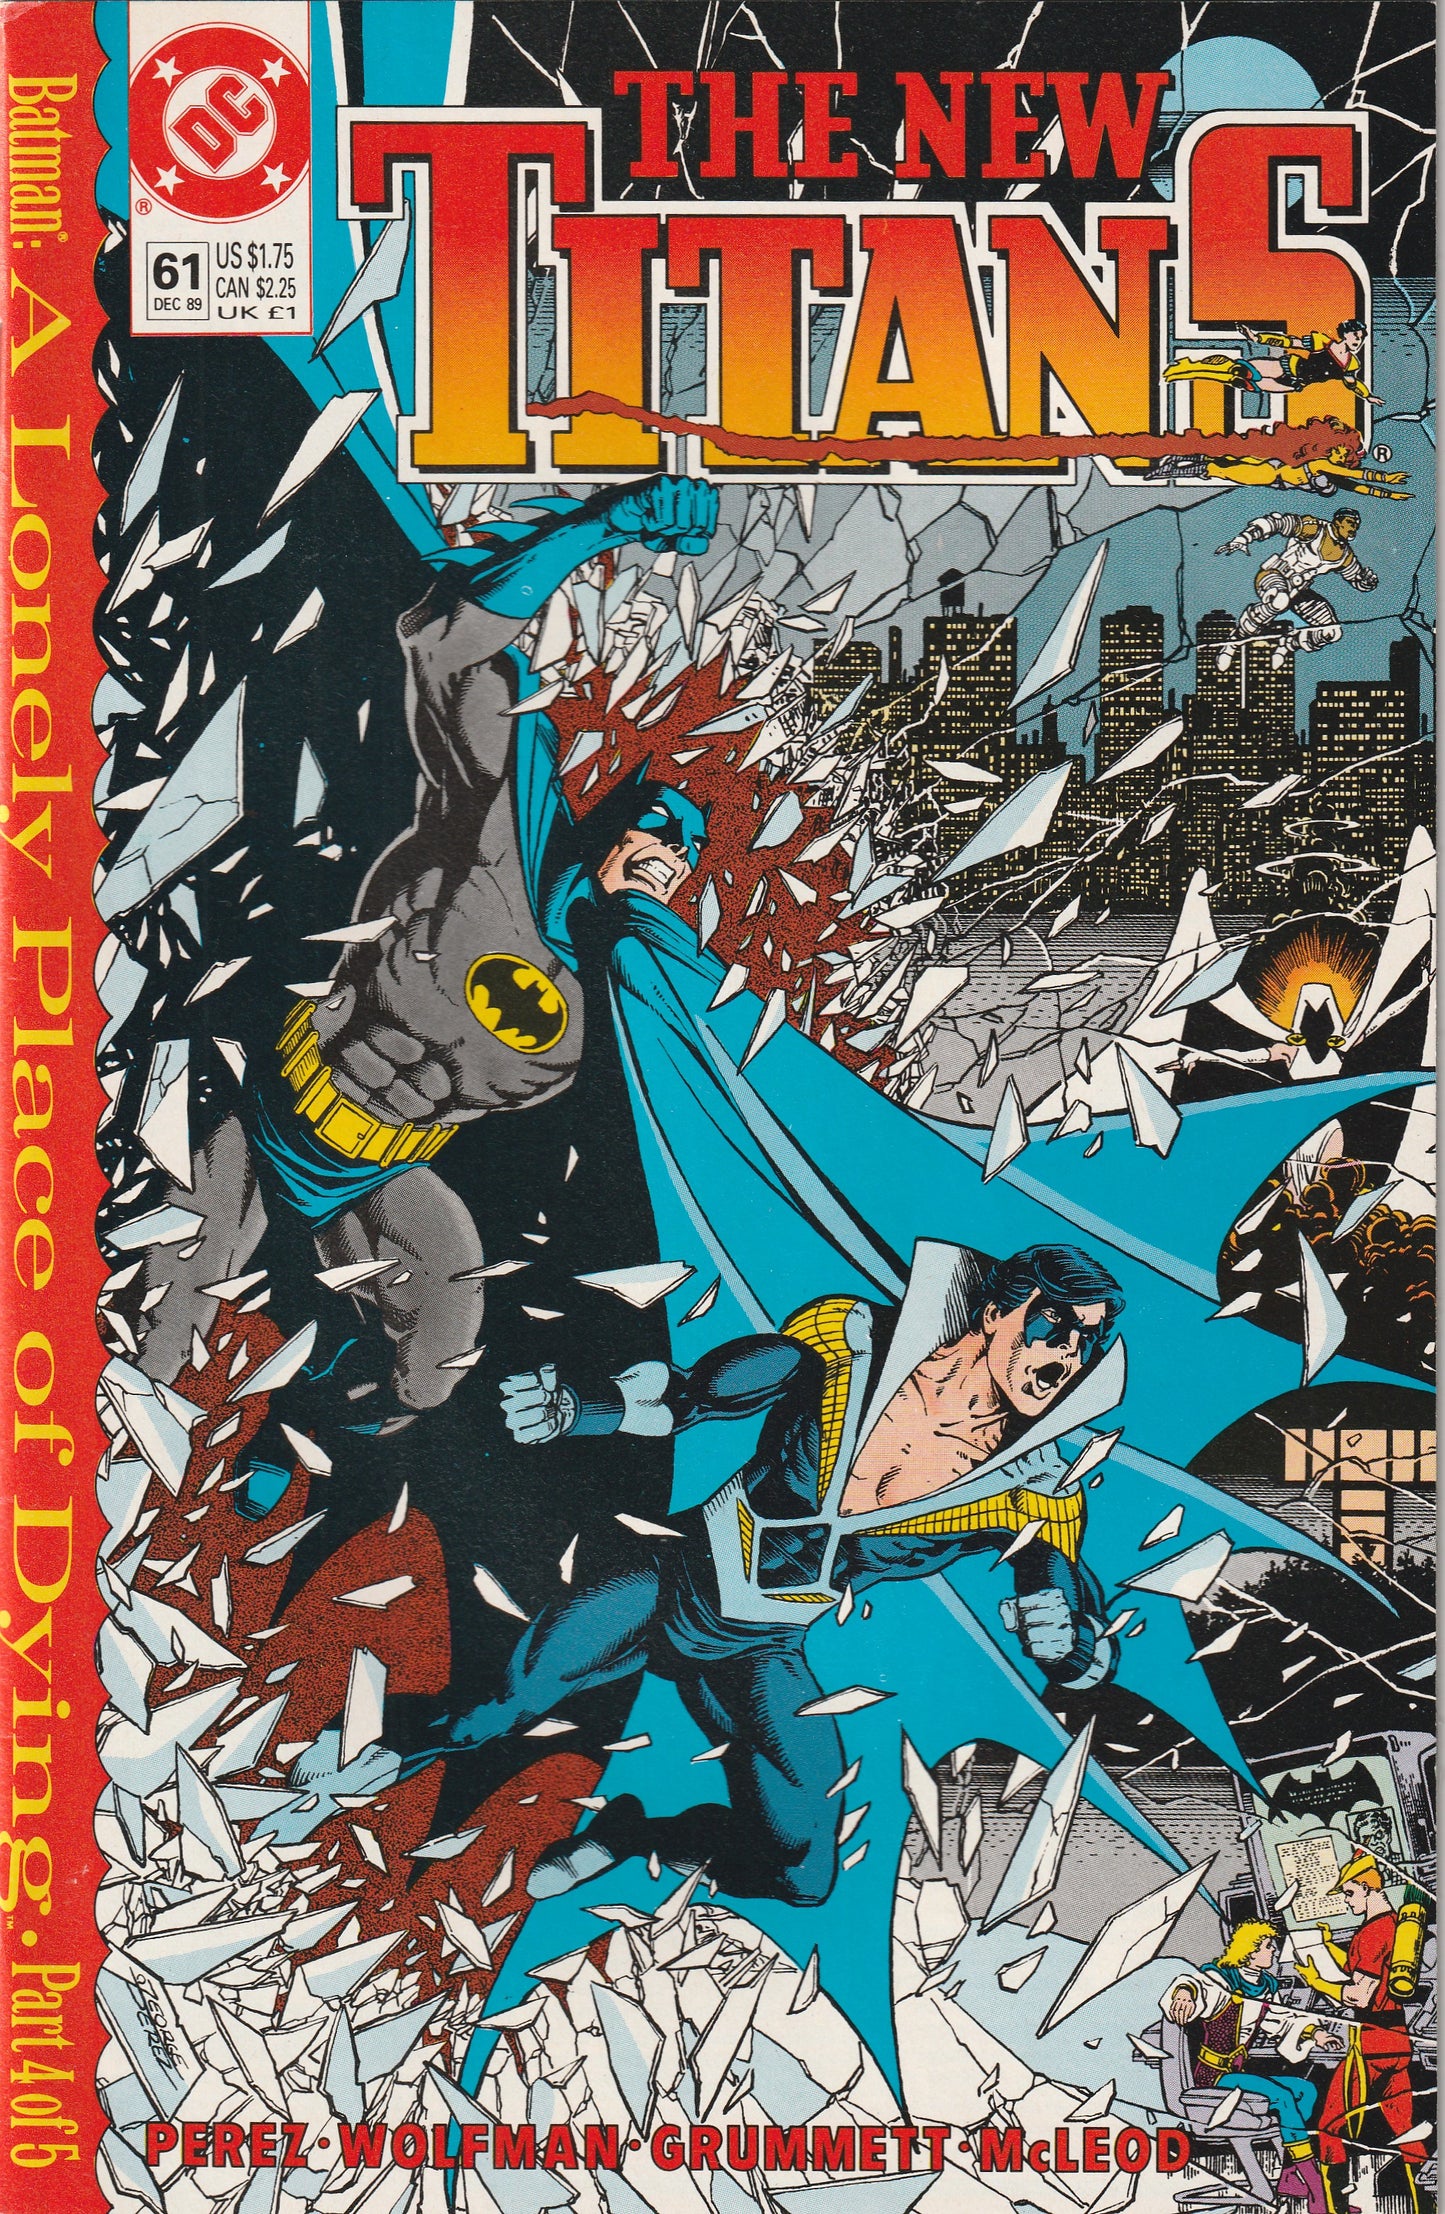 The New Titans #61 (1989) - A Lonely Place of Dying Part 4 - George Perez, Marv Wolfman